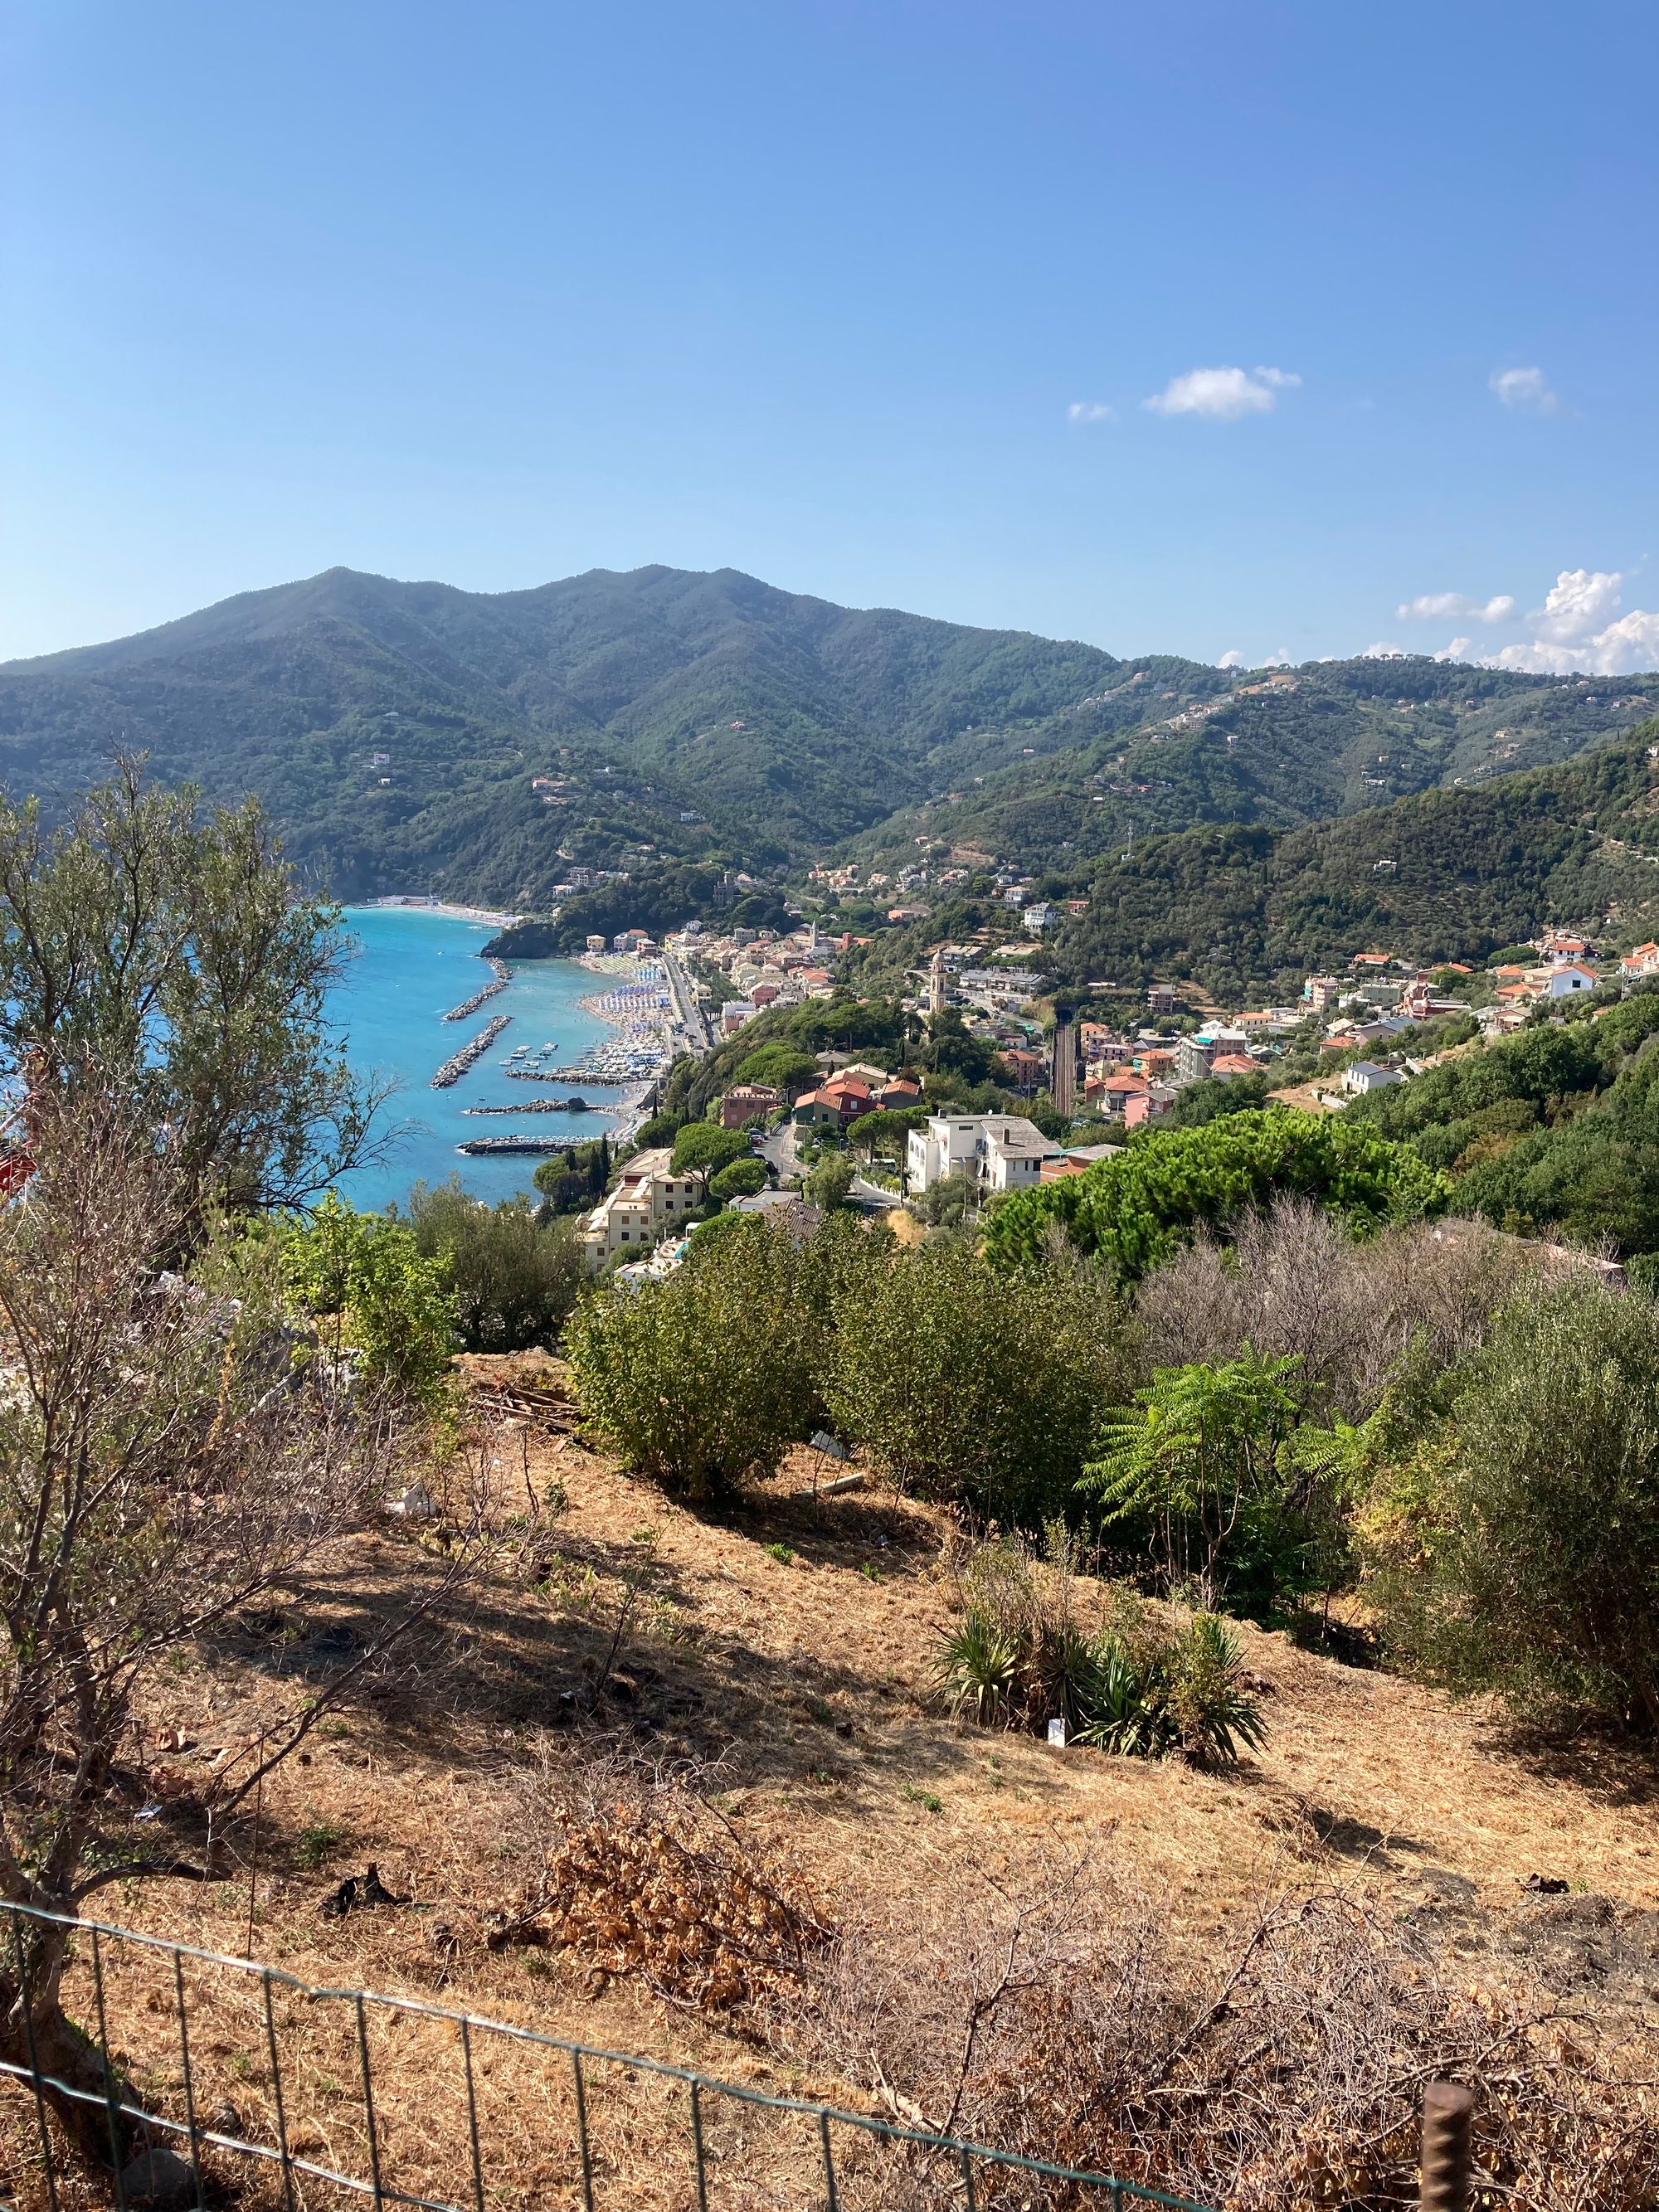 Image of Moneglia taken from a hill. You can see the ocean, the beach and the houses of the town